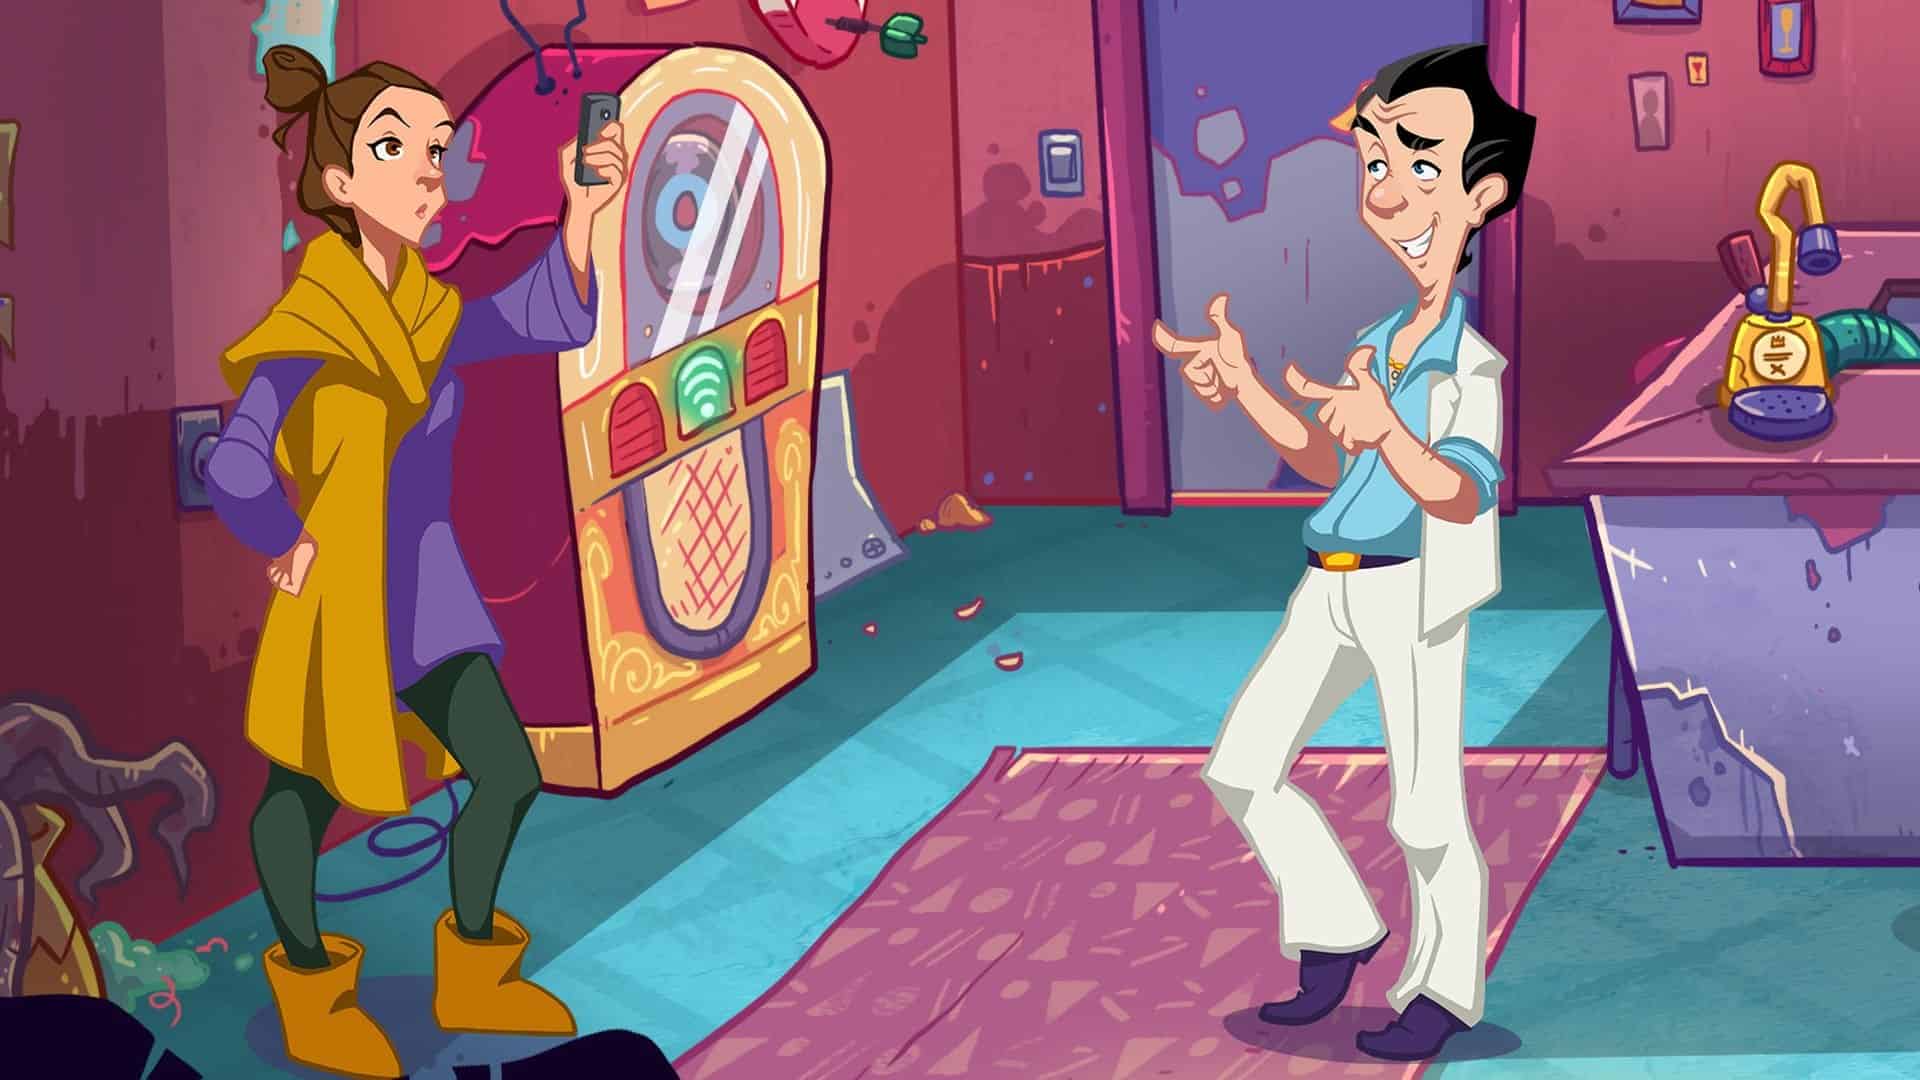 graphic adventure games - THE LEISURE SUIT LARRY SERIES